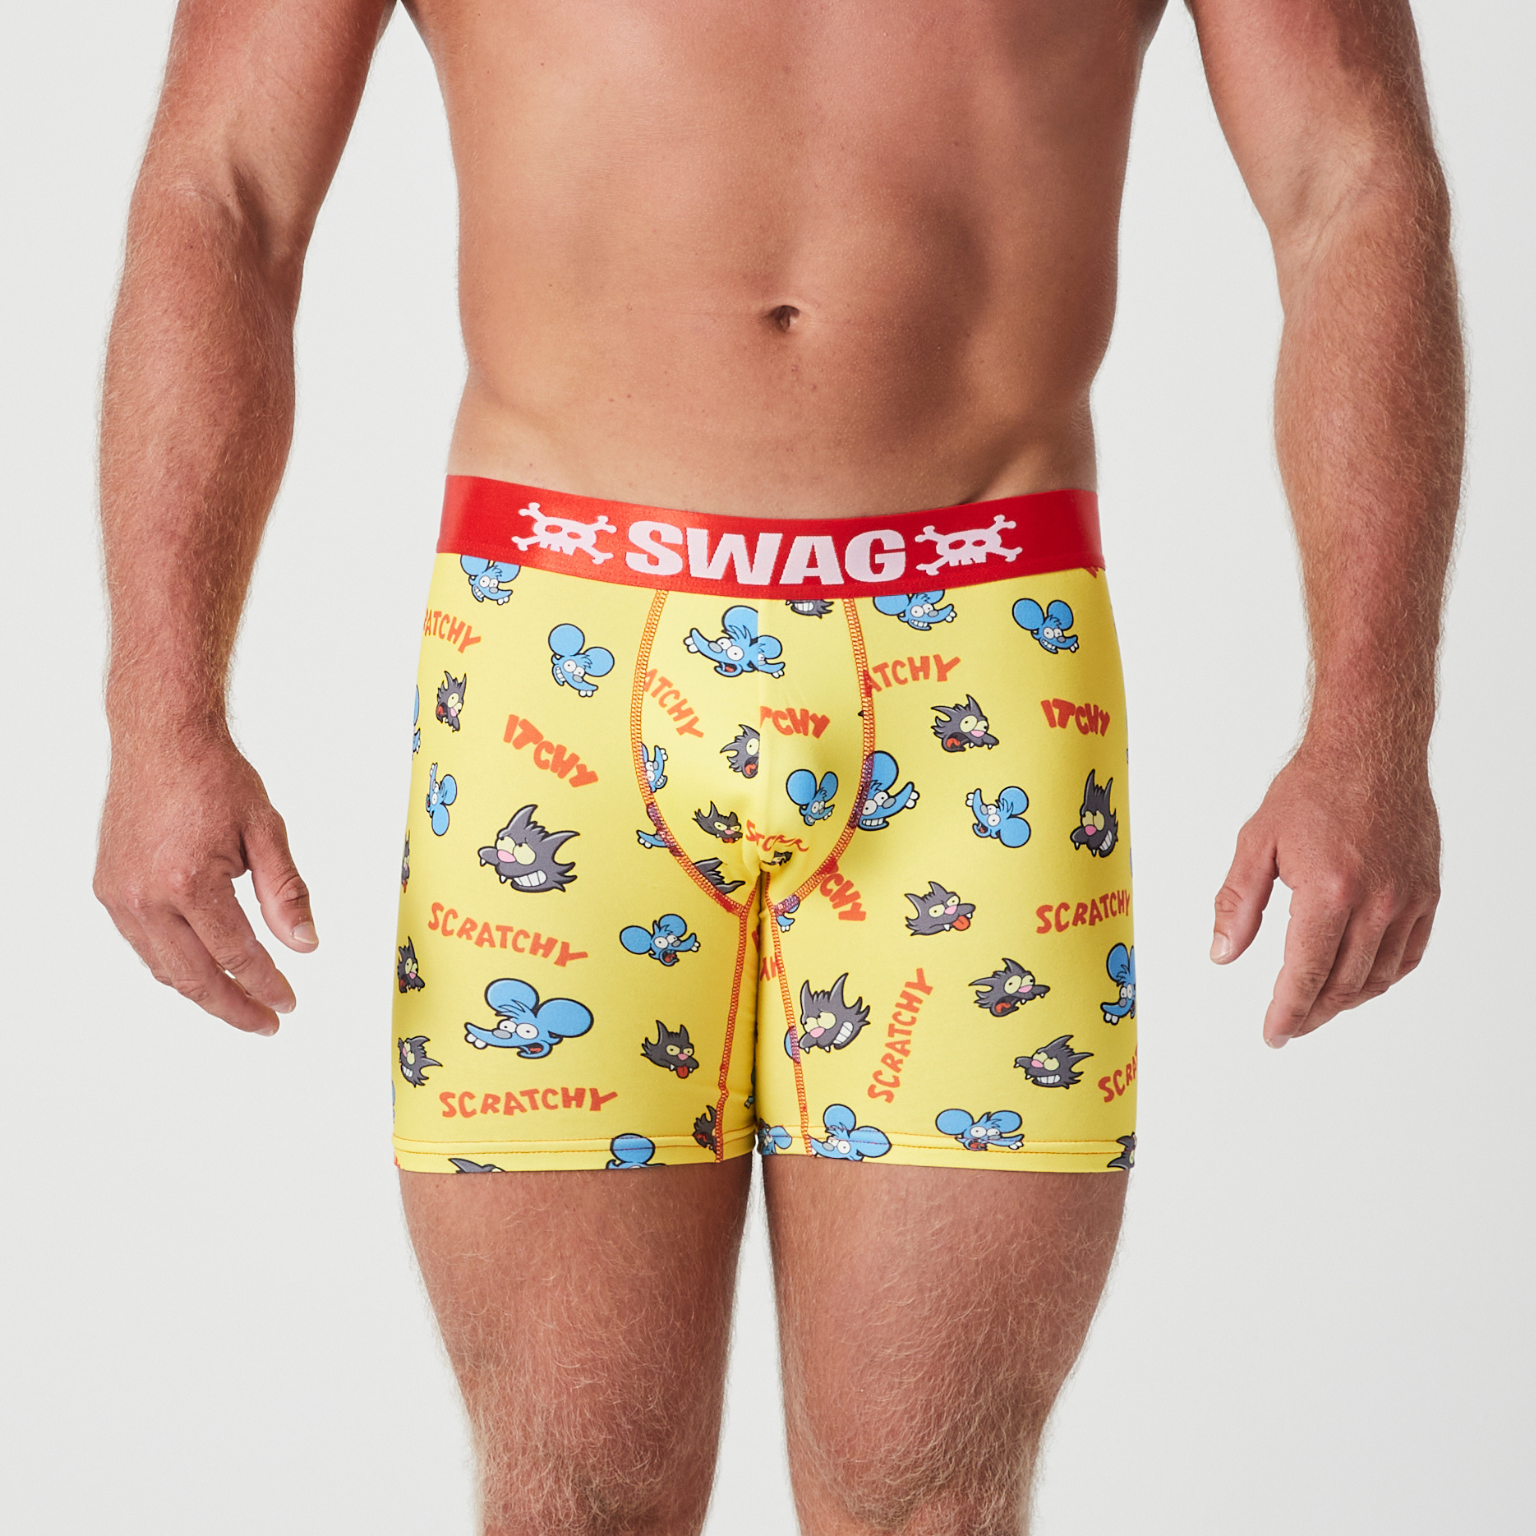 Multicolored Elephant With a Large Trunk for Your Man Boxer Briefs